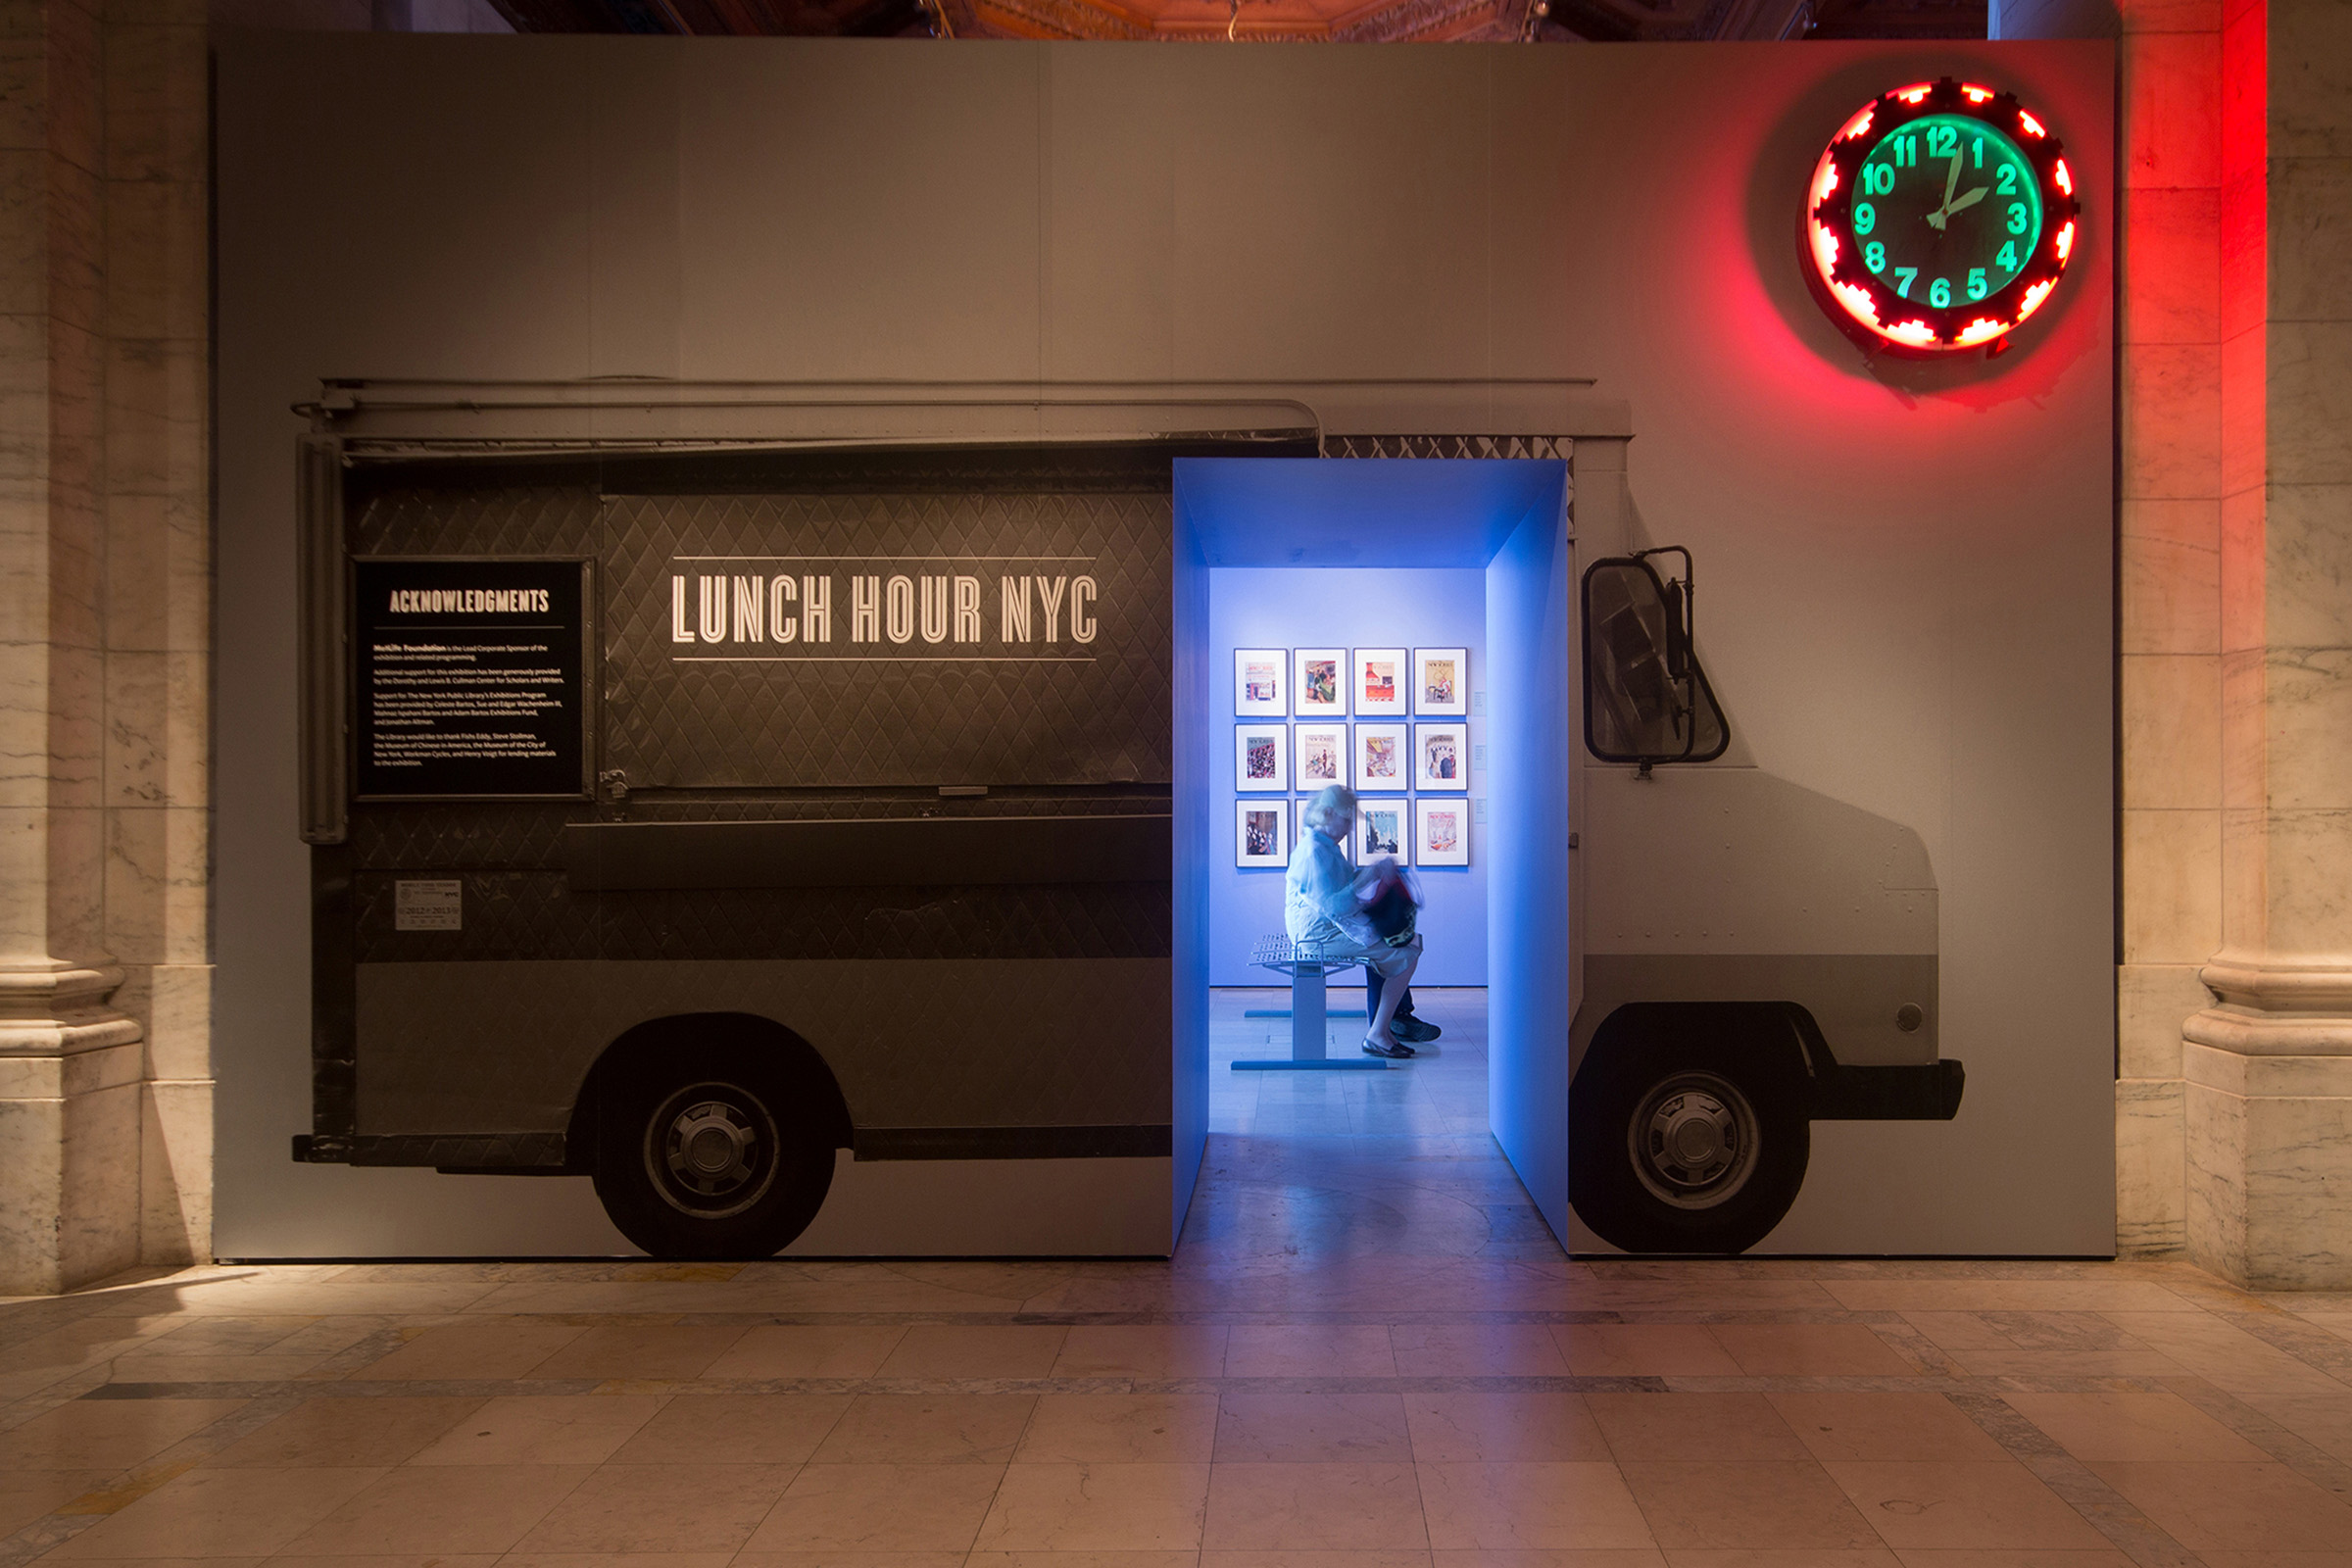 Lunch Hour Exhibition - A life-sized photo of a food truck greeted visitors as they entered the exhibition.